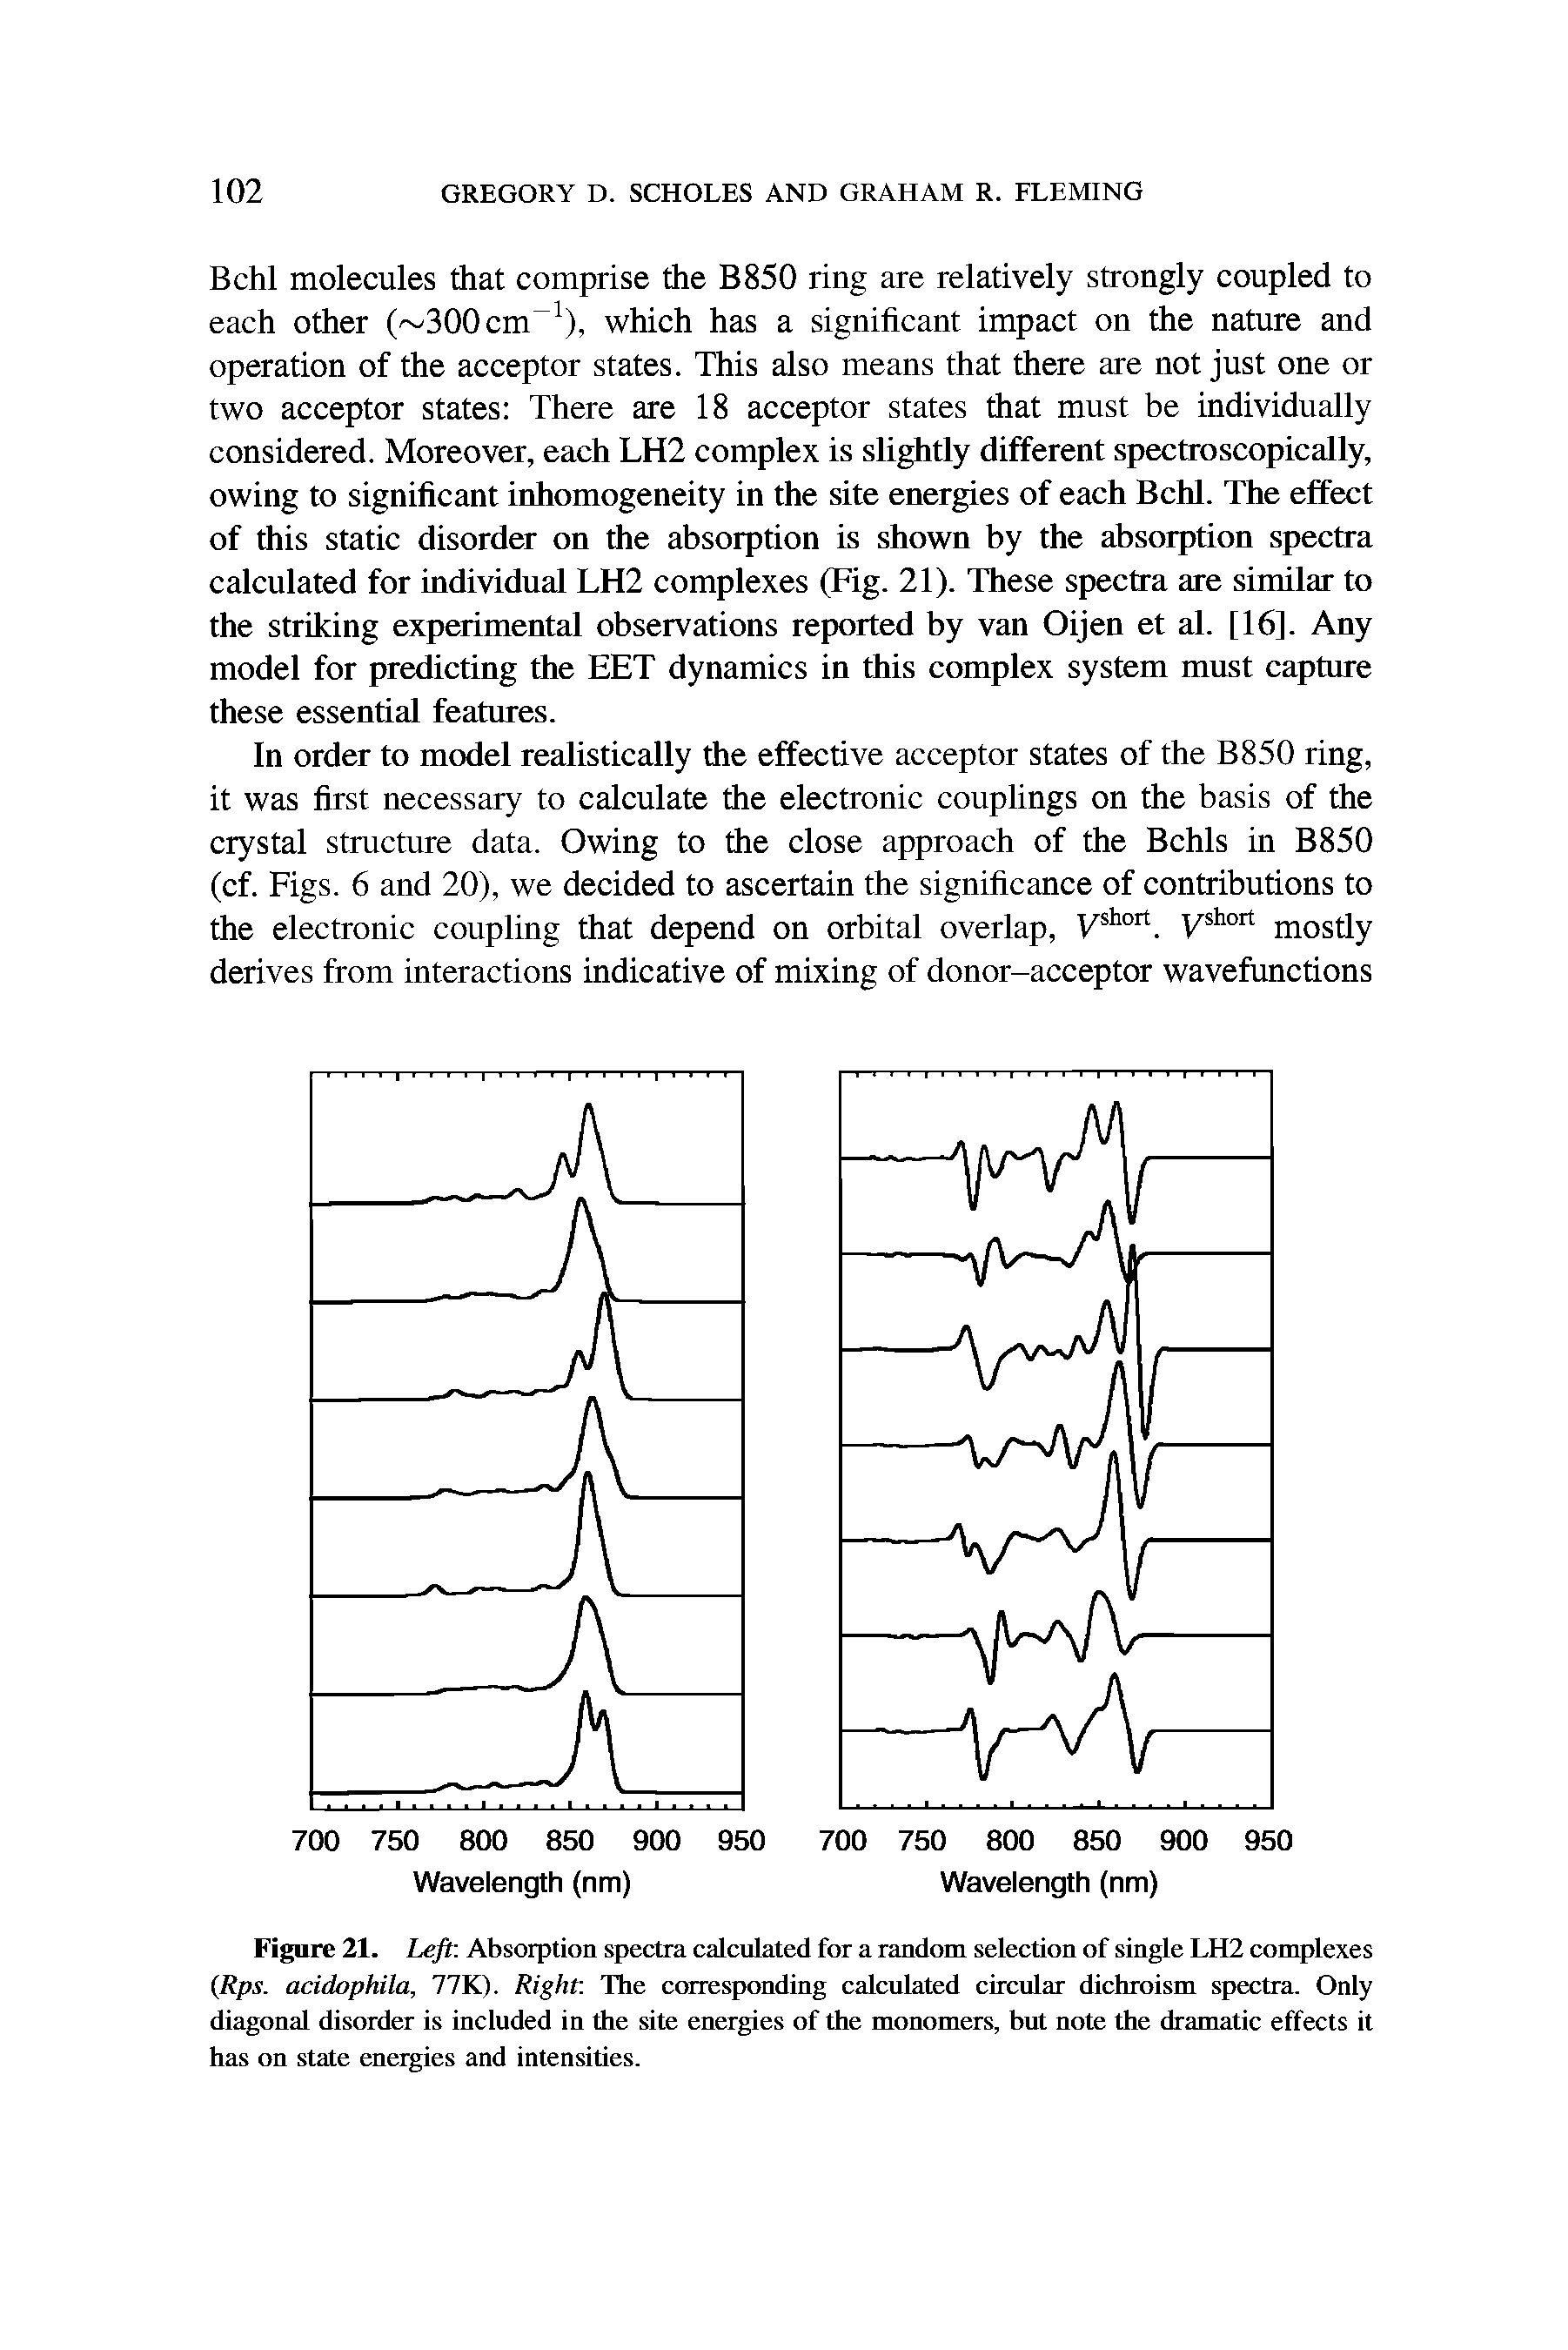 Figure 21. Left Absorption spectra calculated for a random selection of single LH2 complexes Rps. acidophila, 77K). Right The corresponding calculated circular dichroism spectra. Only diagonal disorder is included in the site energies of the monomers, but note the dramatic effects it has on state energies and intensities.